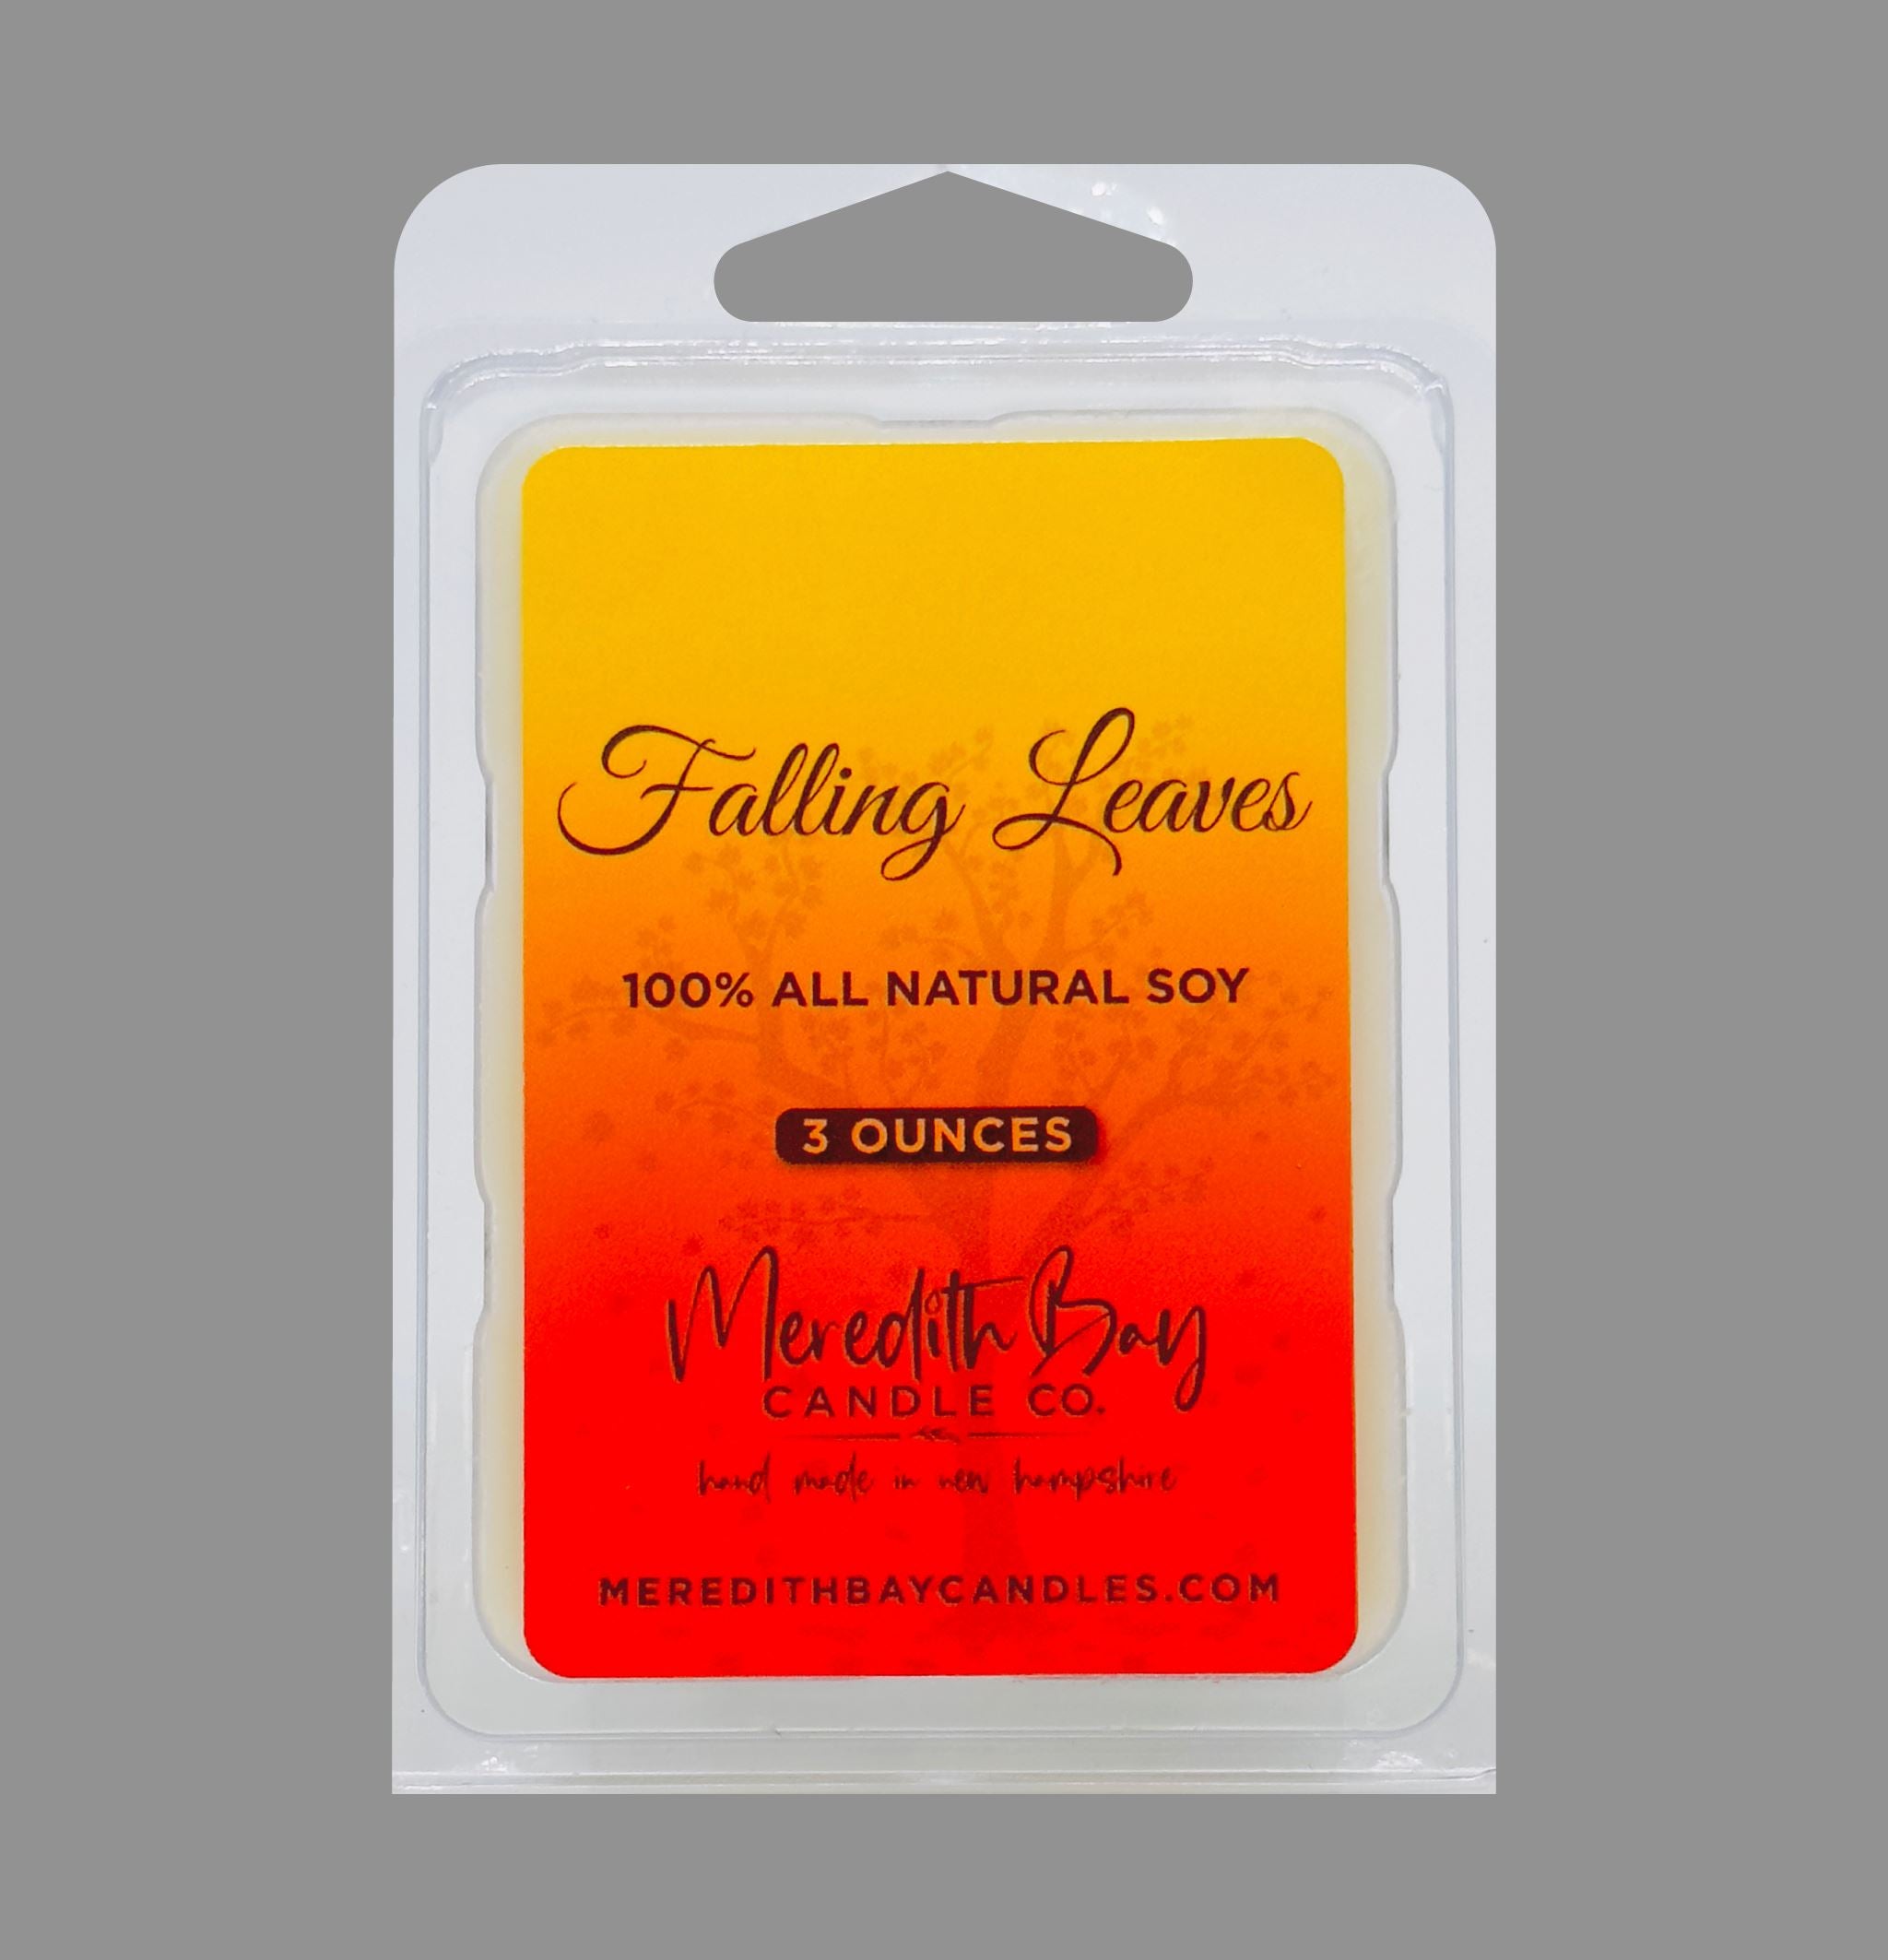 Falling Leaves Wax Melt Meredith Bay Candle Co 